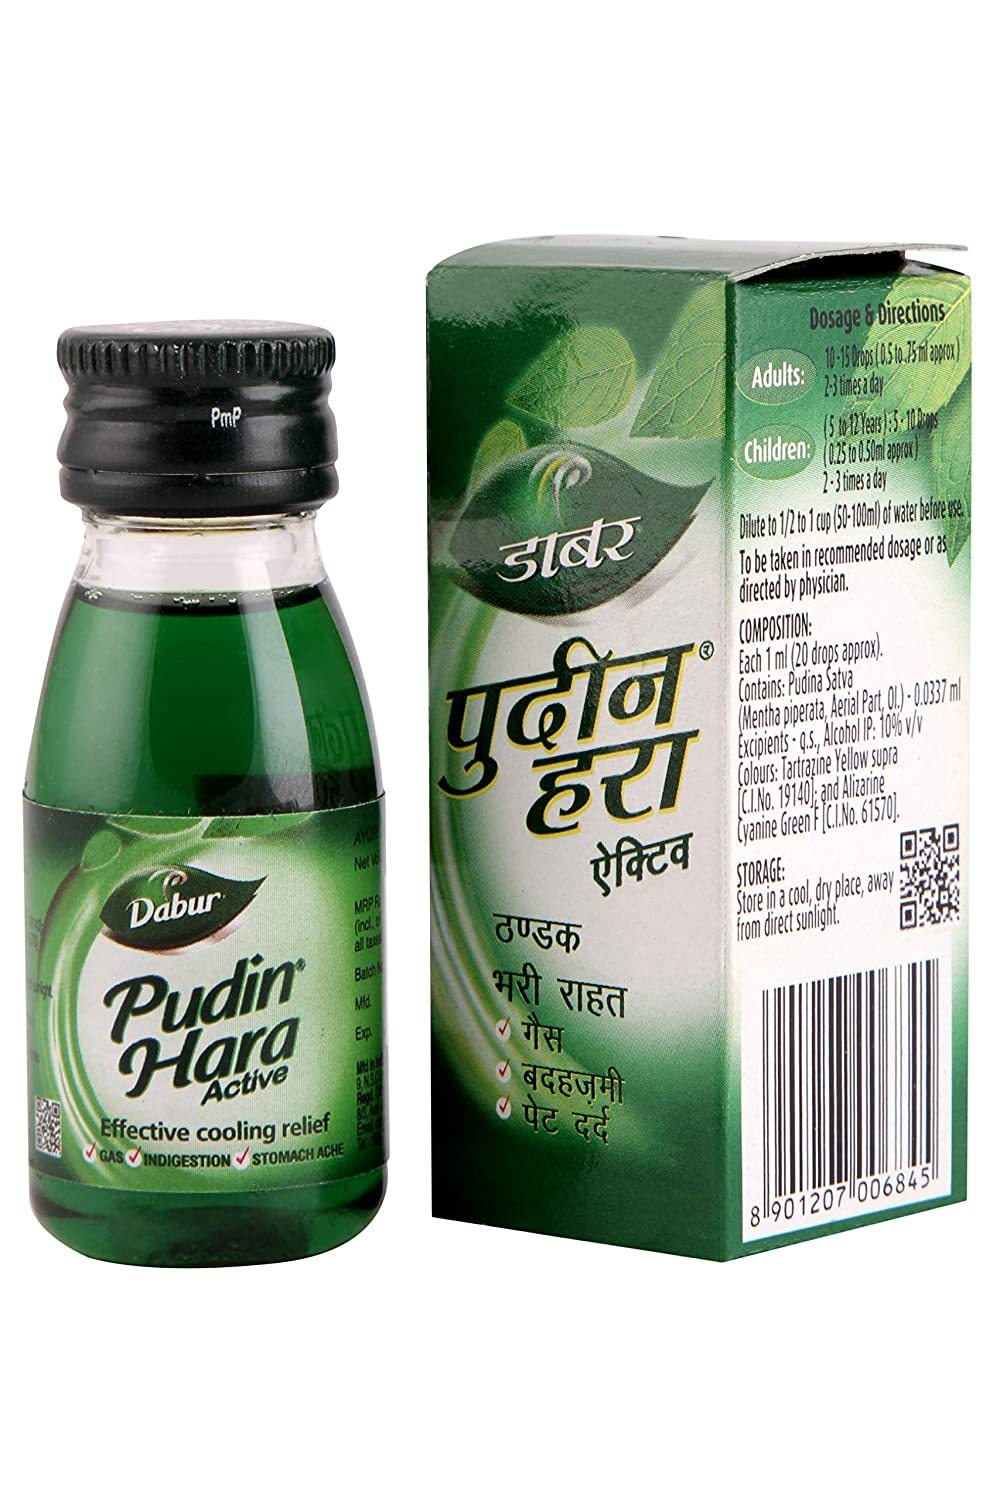 DABUR Pudin Hara Active Digestive Solution 30 ml,Pack of 2 For Gas,Indigestion - $17.25